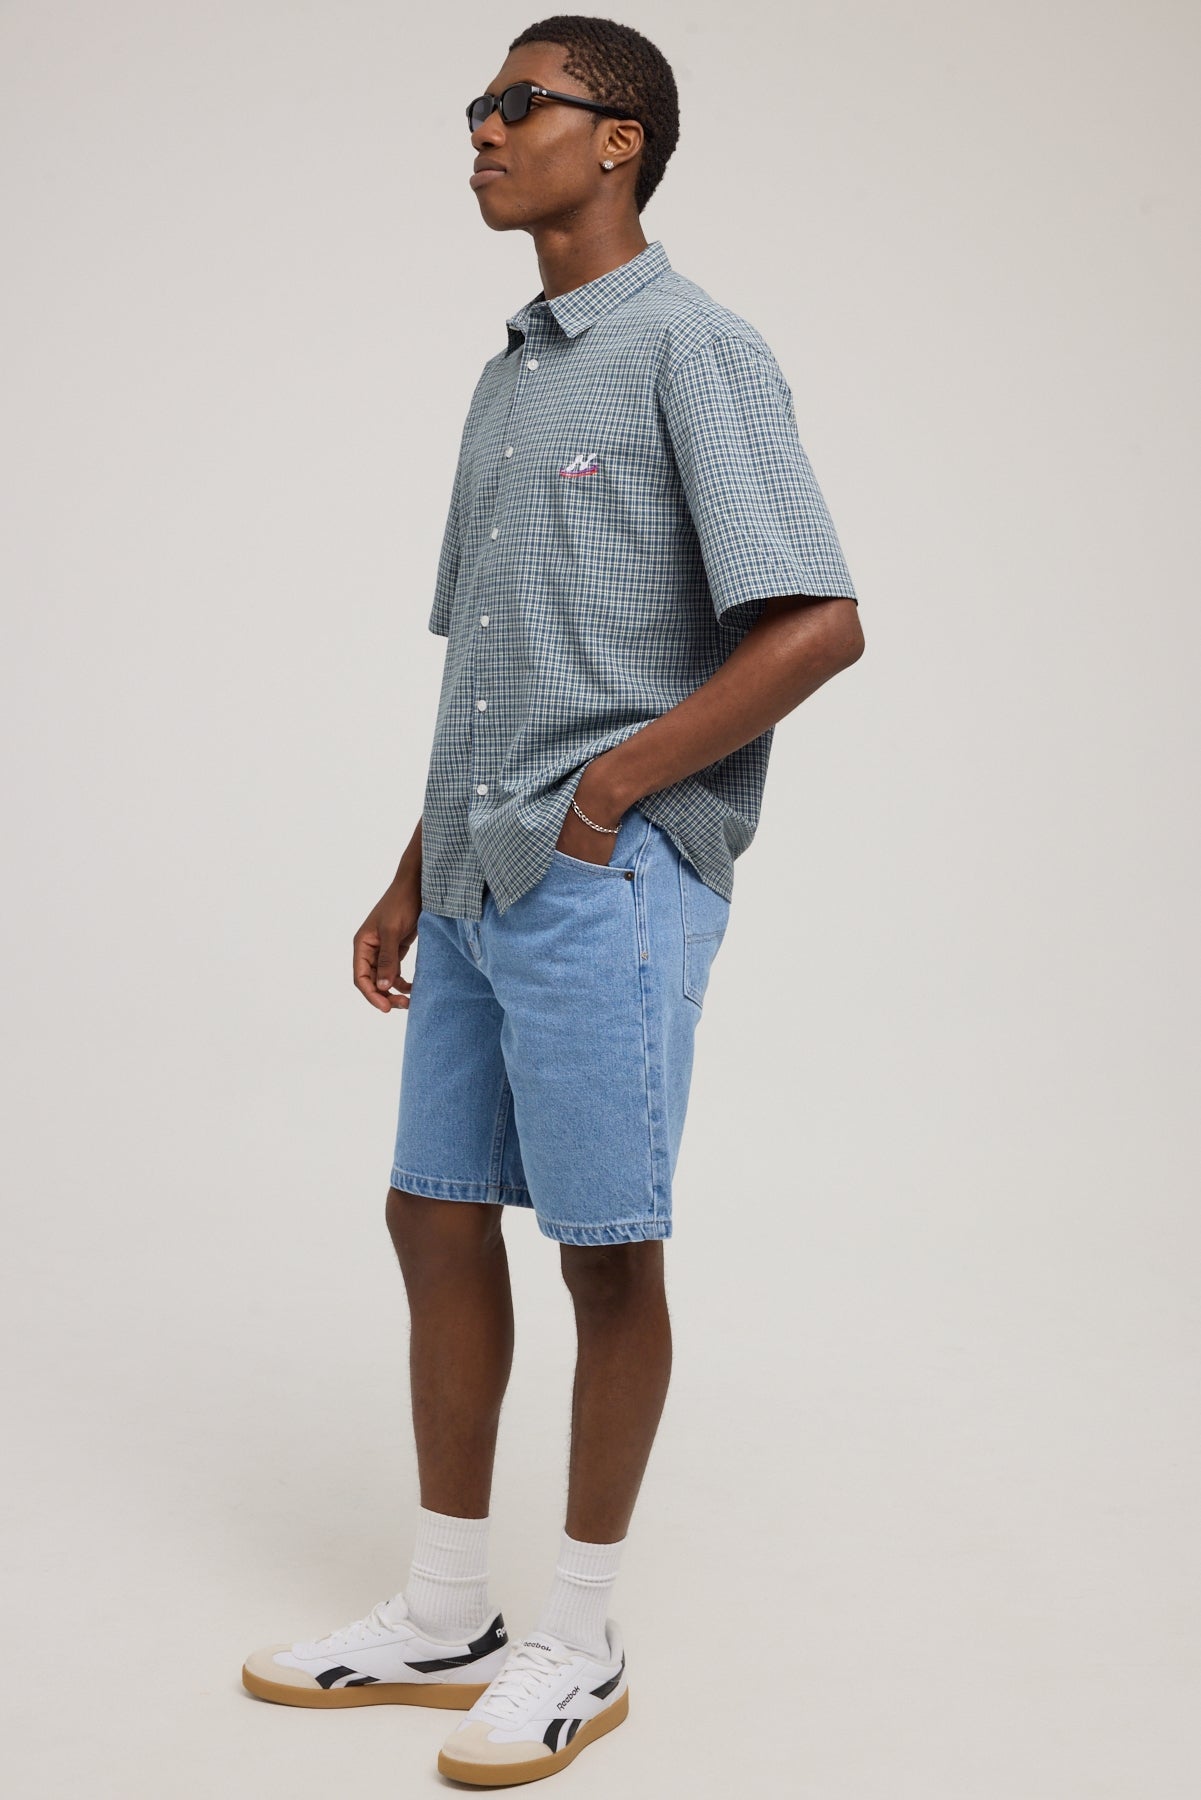 Abrand A5 Baggy Short Larry Mid Blue